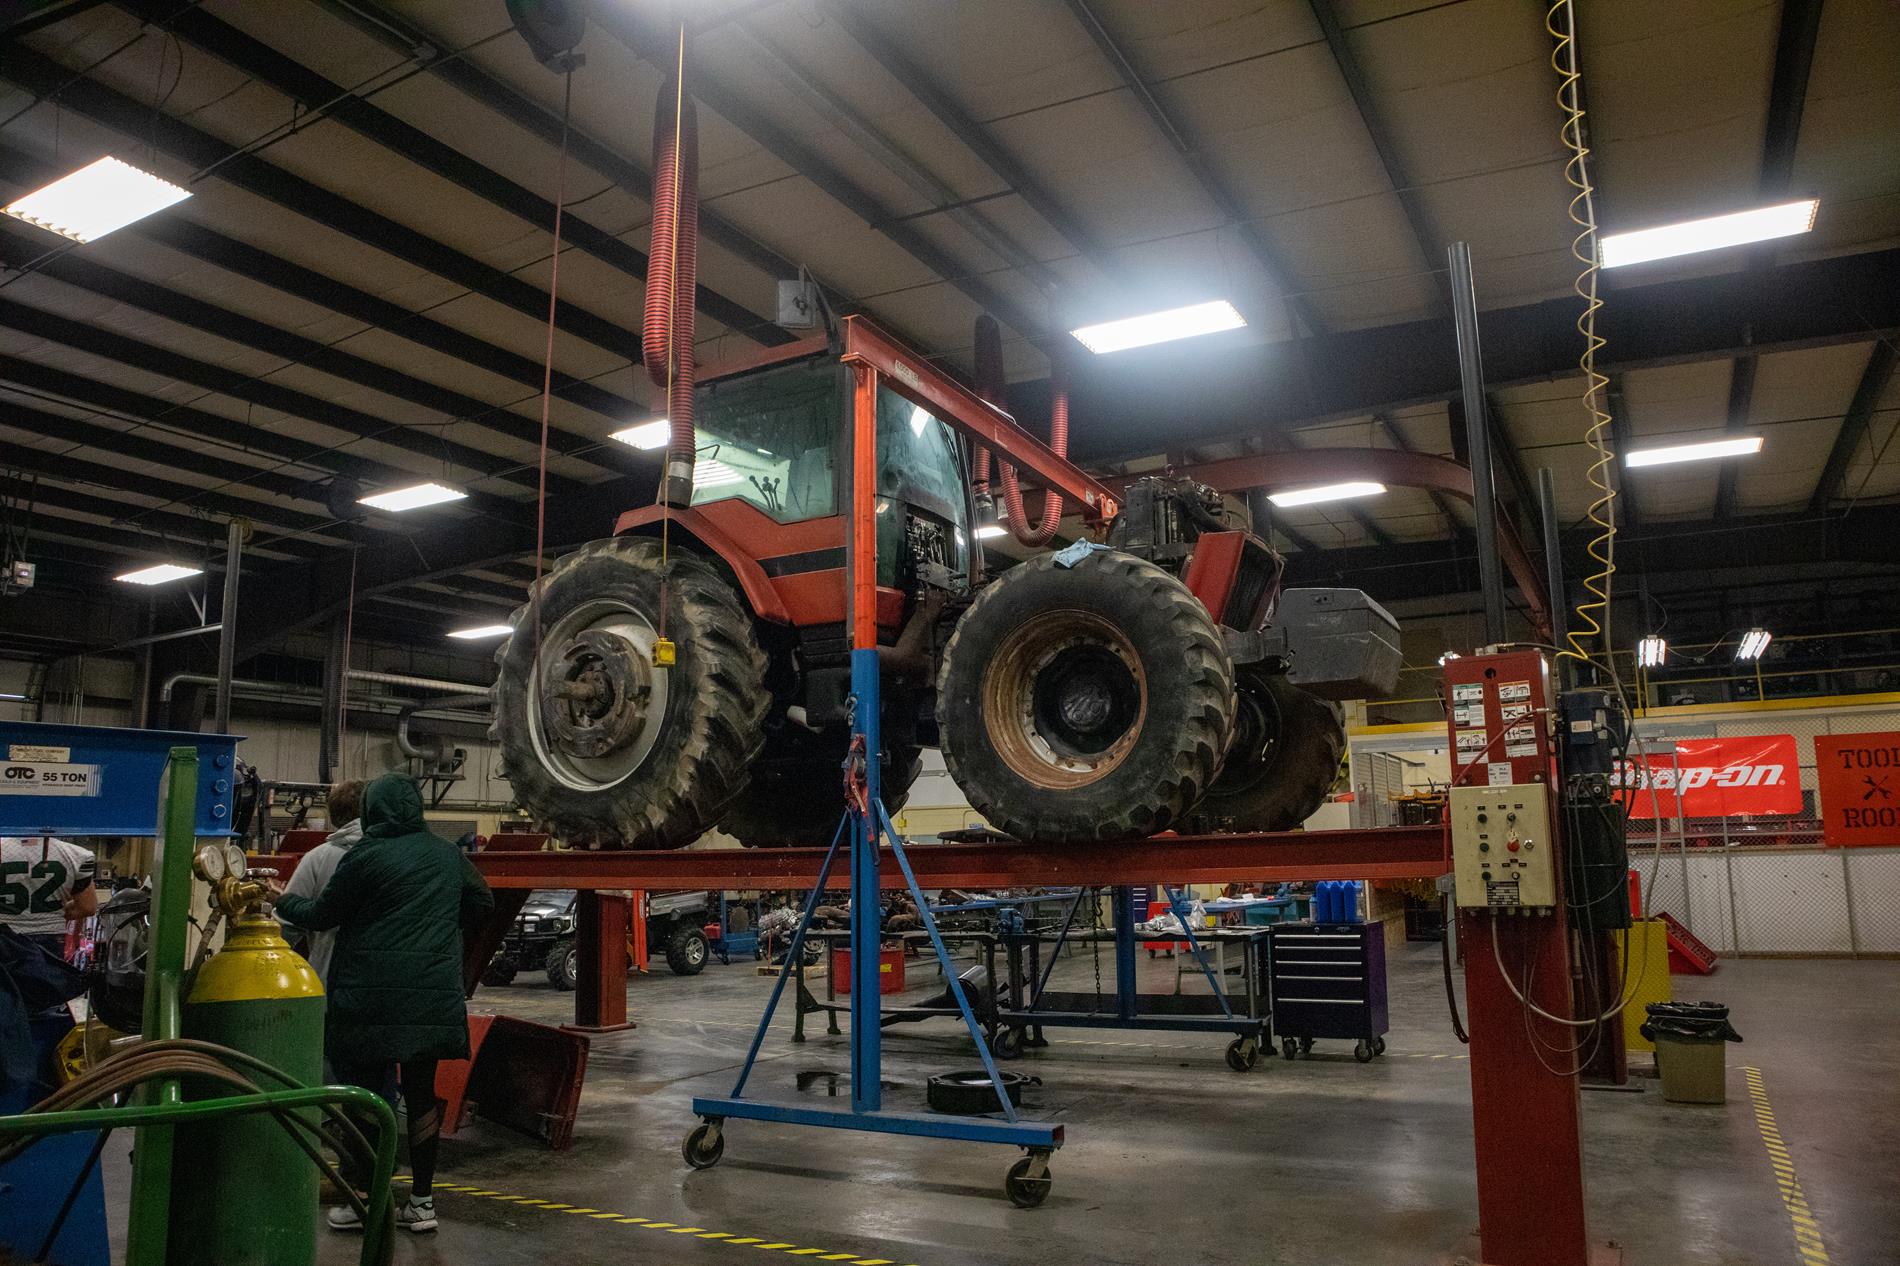 Students working on a tractor.